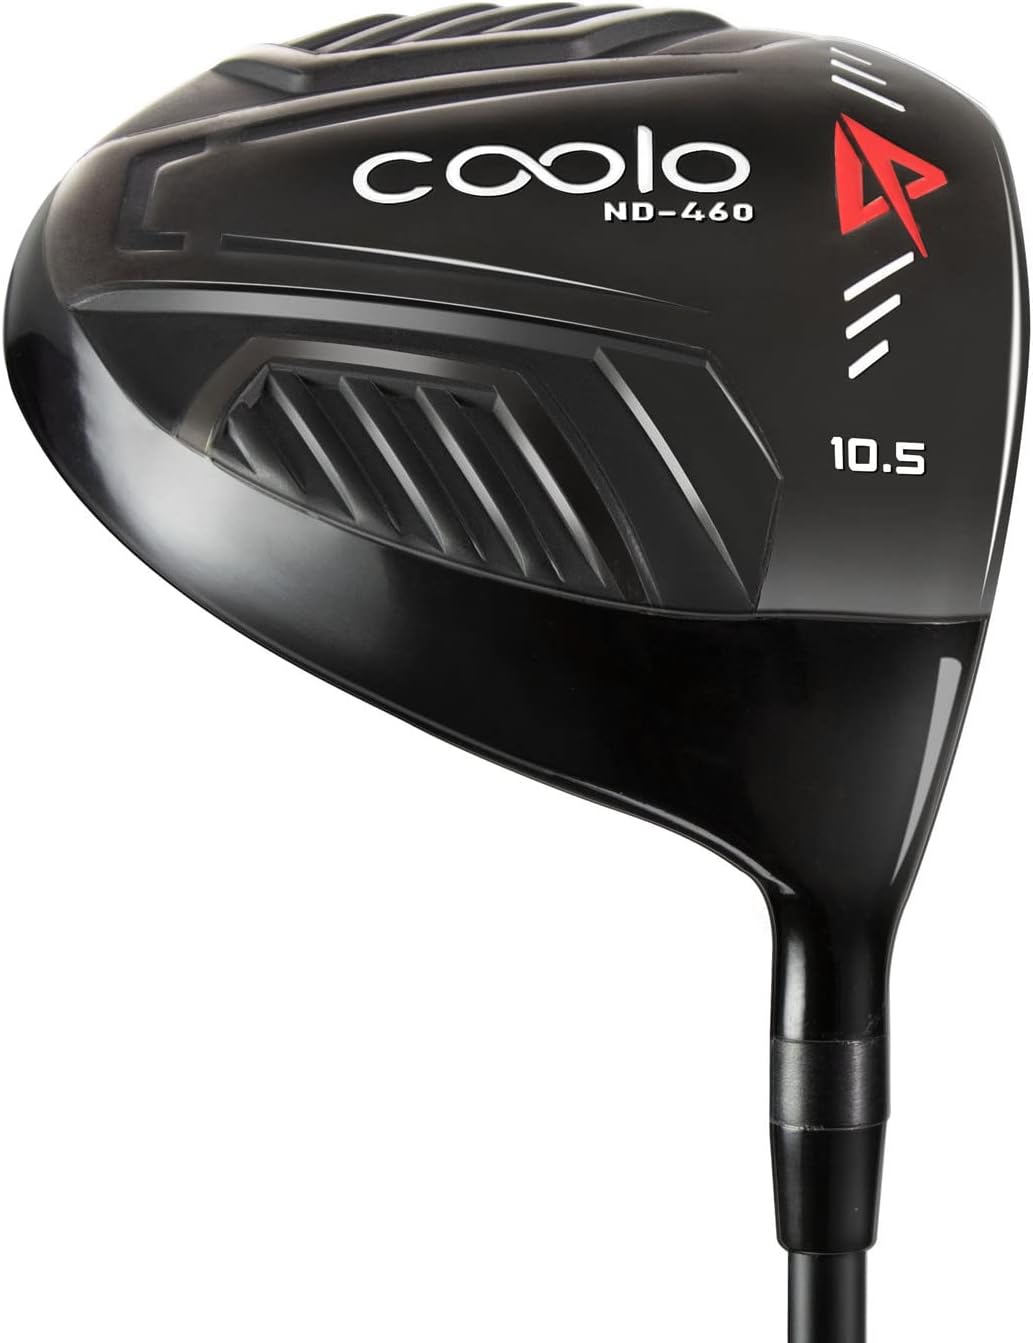 COOLO Golf Drivers Review